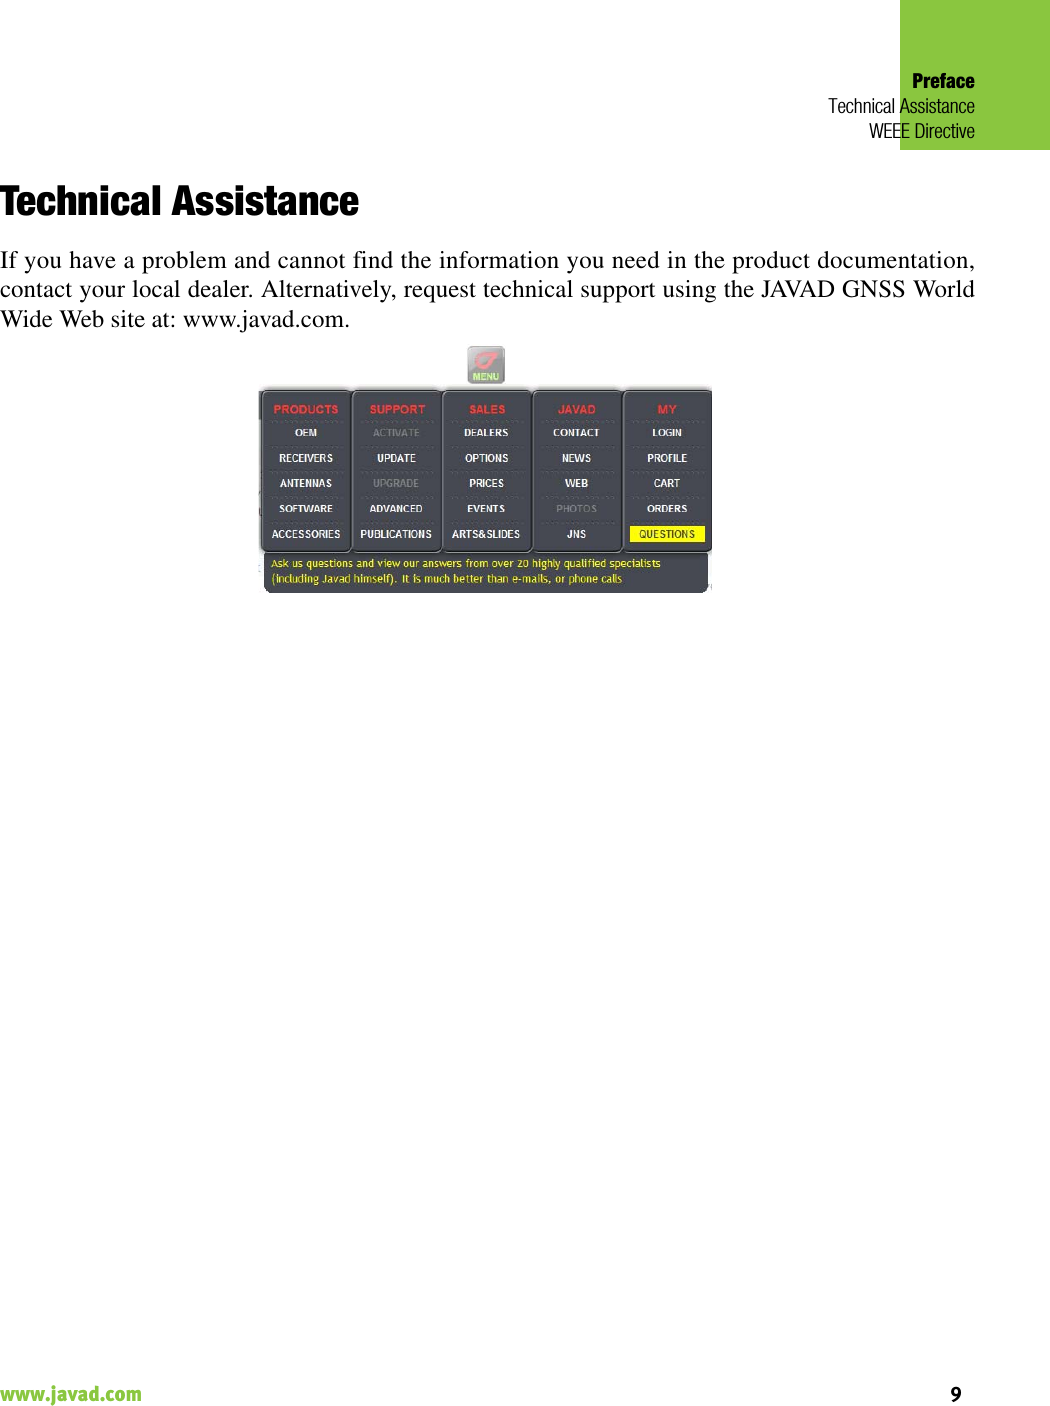 PrefaceTechnical AssistanceWEEE Directive9www.javad.com                                                                                                                                                    Technical AssistanceIf you have a problem and cannot find the information you need in the product documentation,contact your local dealer. Alternatively, request technical support using the JAVAD GNSS WorldWide Web site at: www.javad.com.